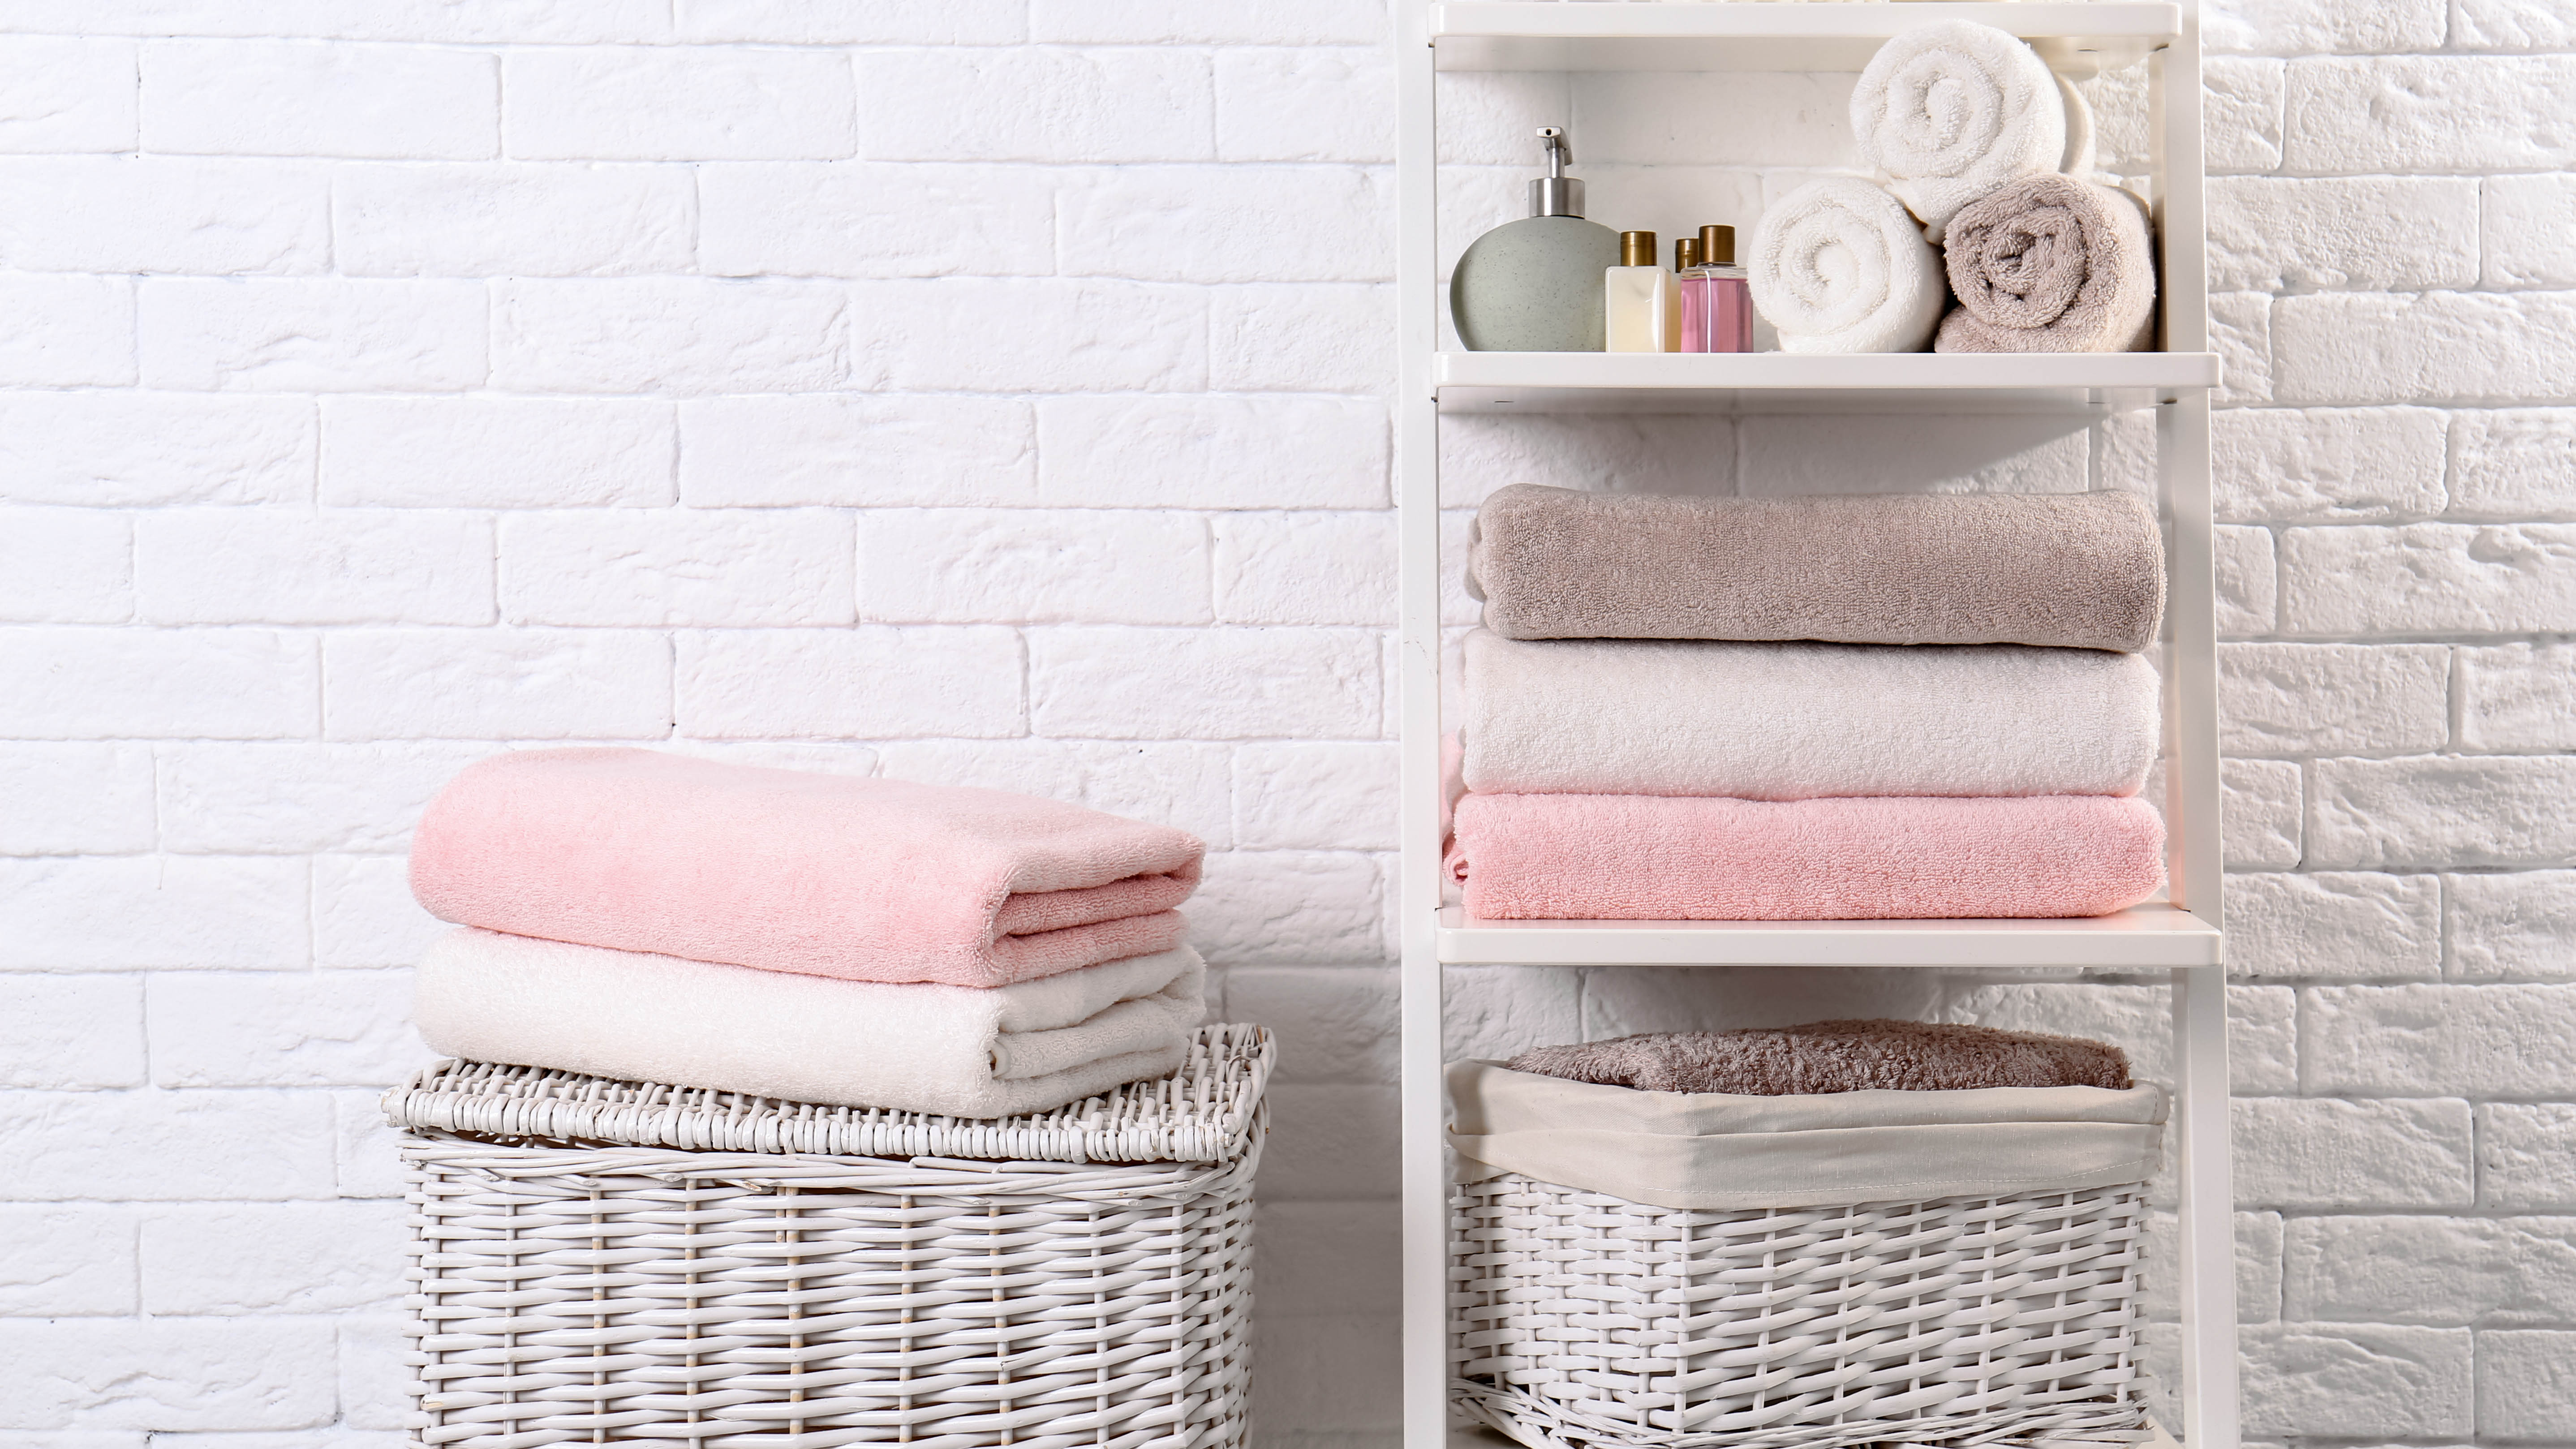 How Often to Wash Towels - Towel Laundry Advice